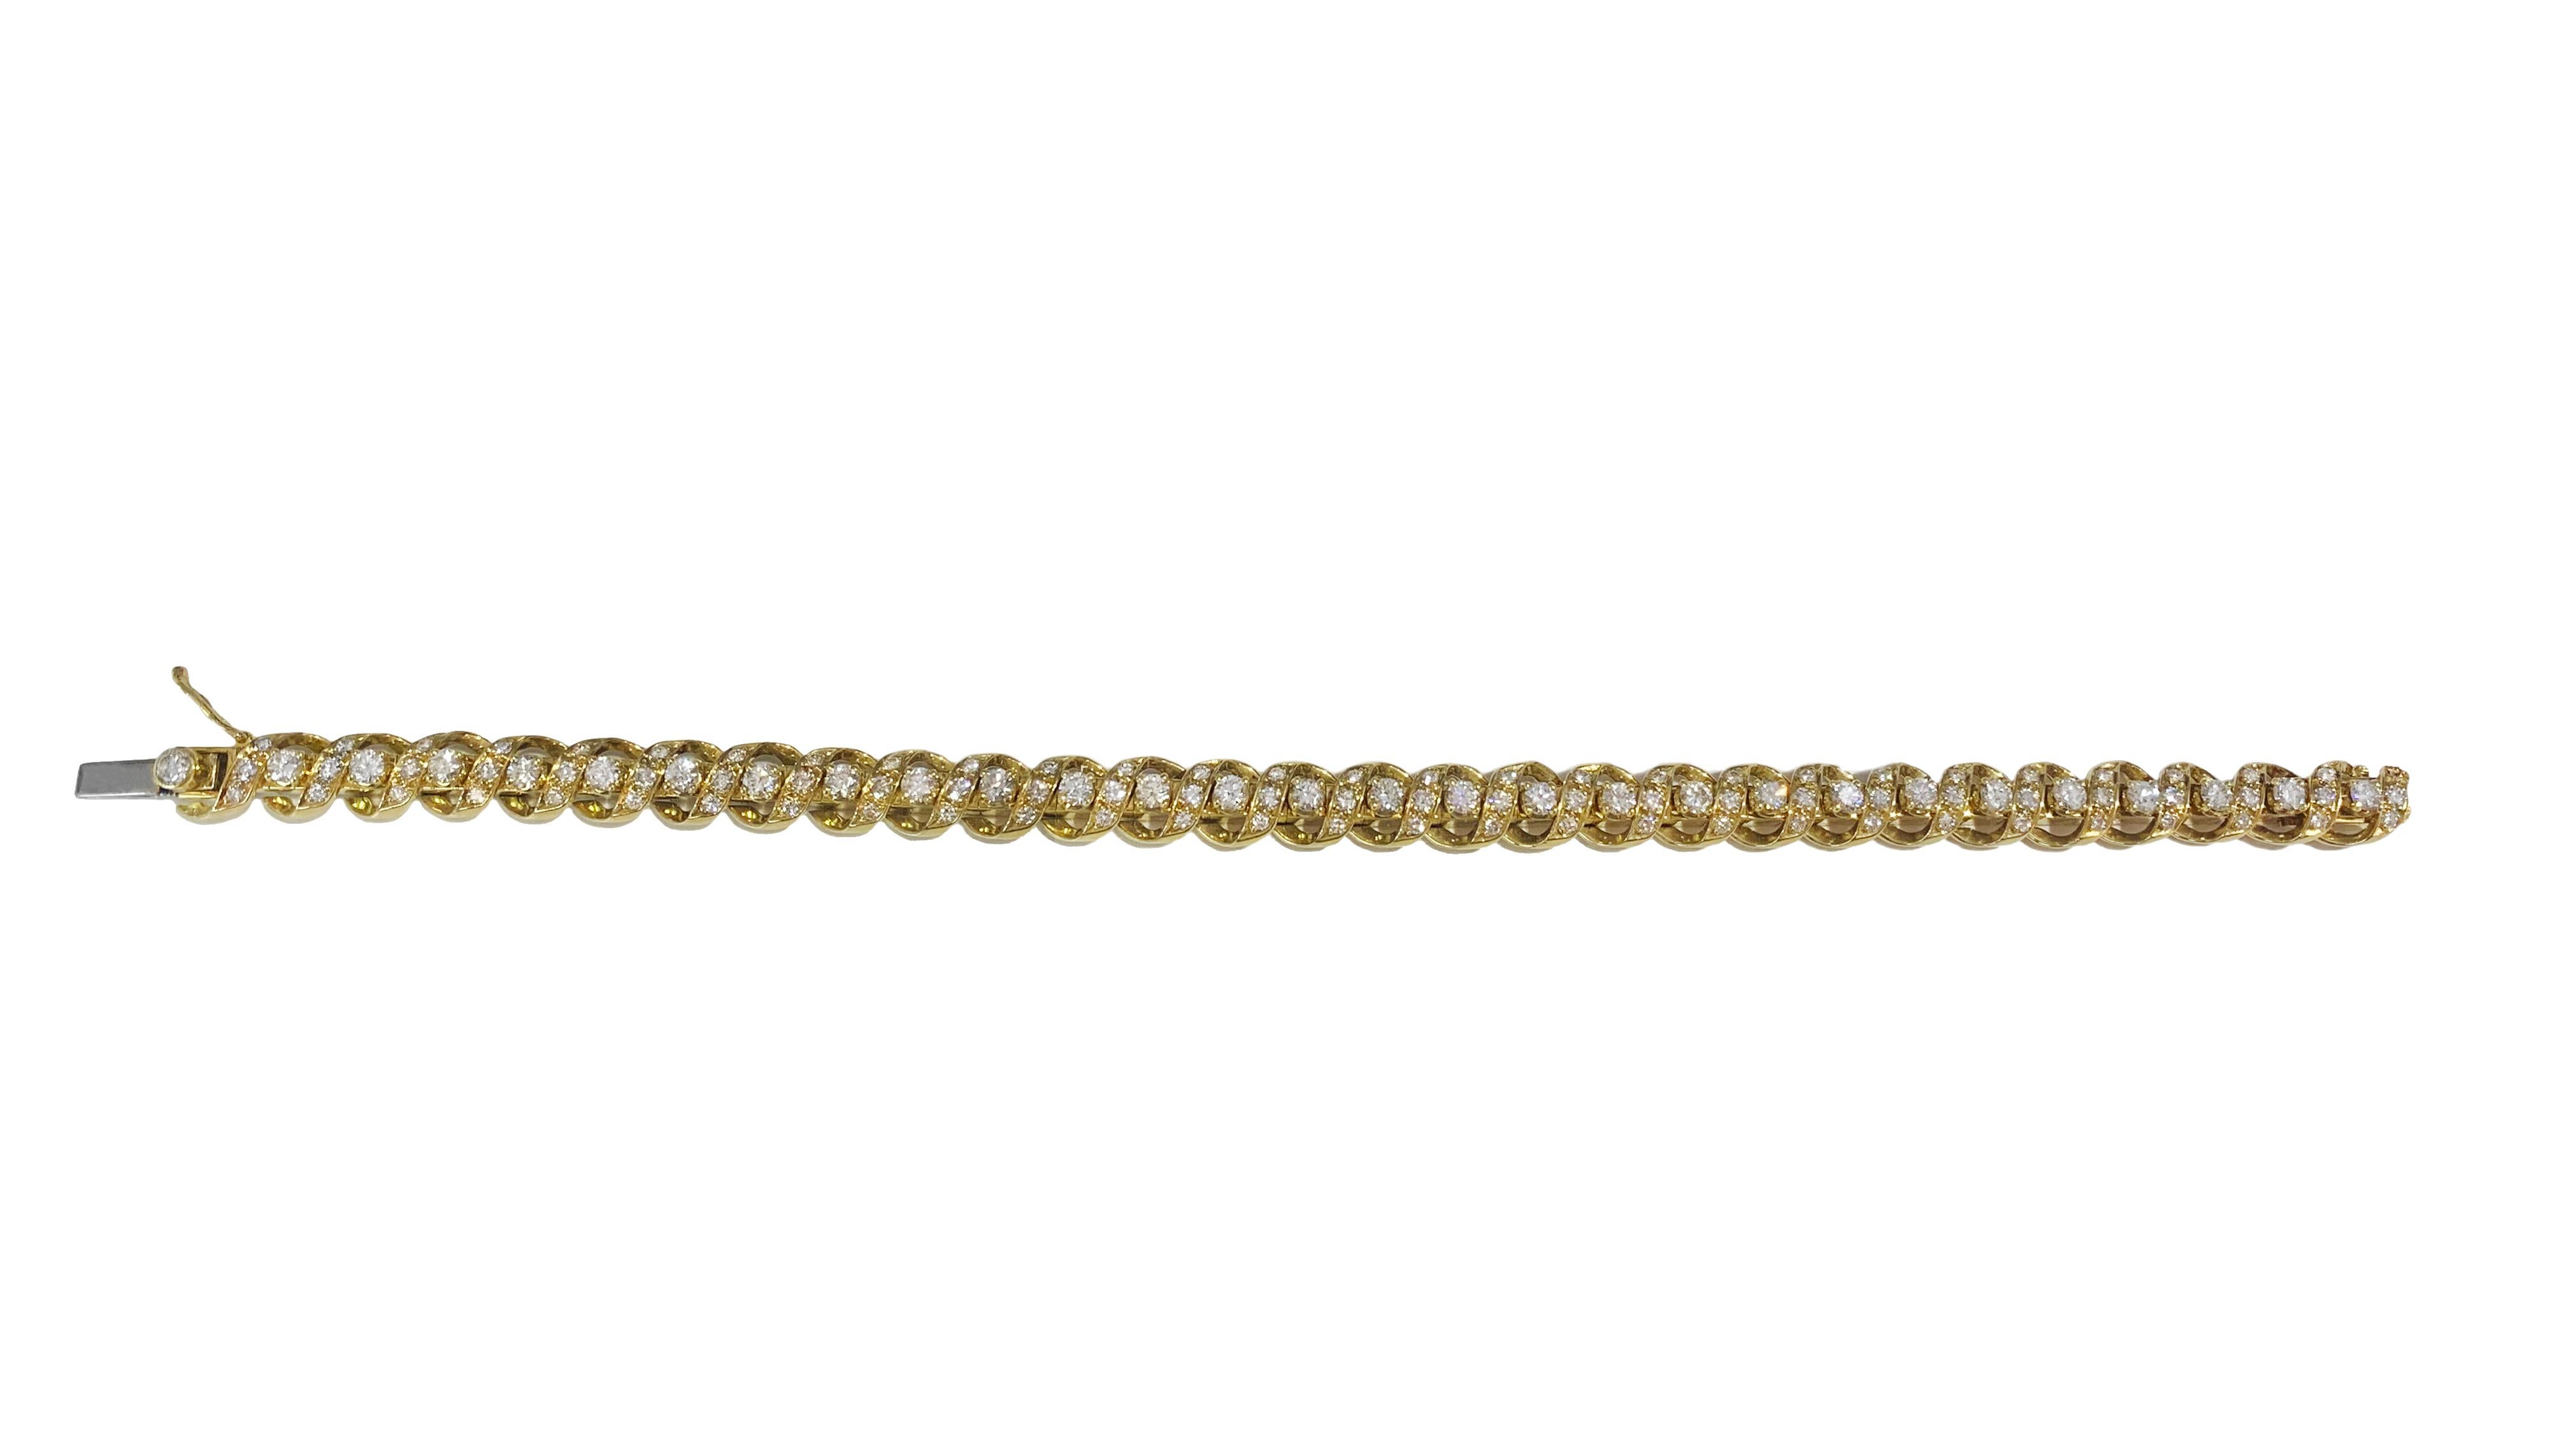 Mint condition
Swiss Made
18k yellow gold
4.1ctw of diamonds
Length: 7”
Width: 0.26”
Fully marked 